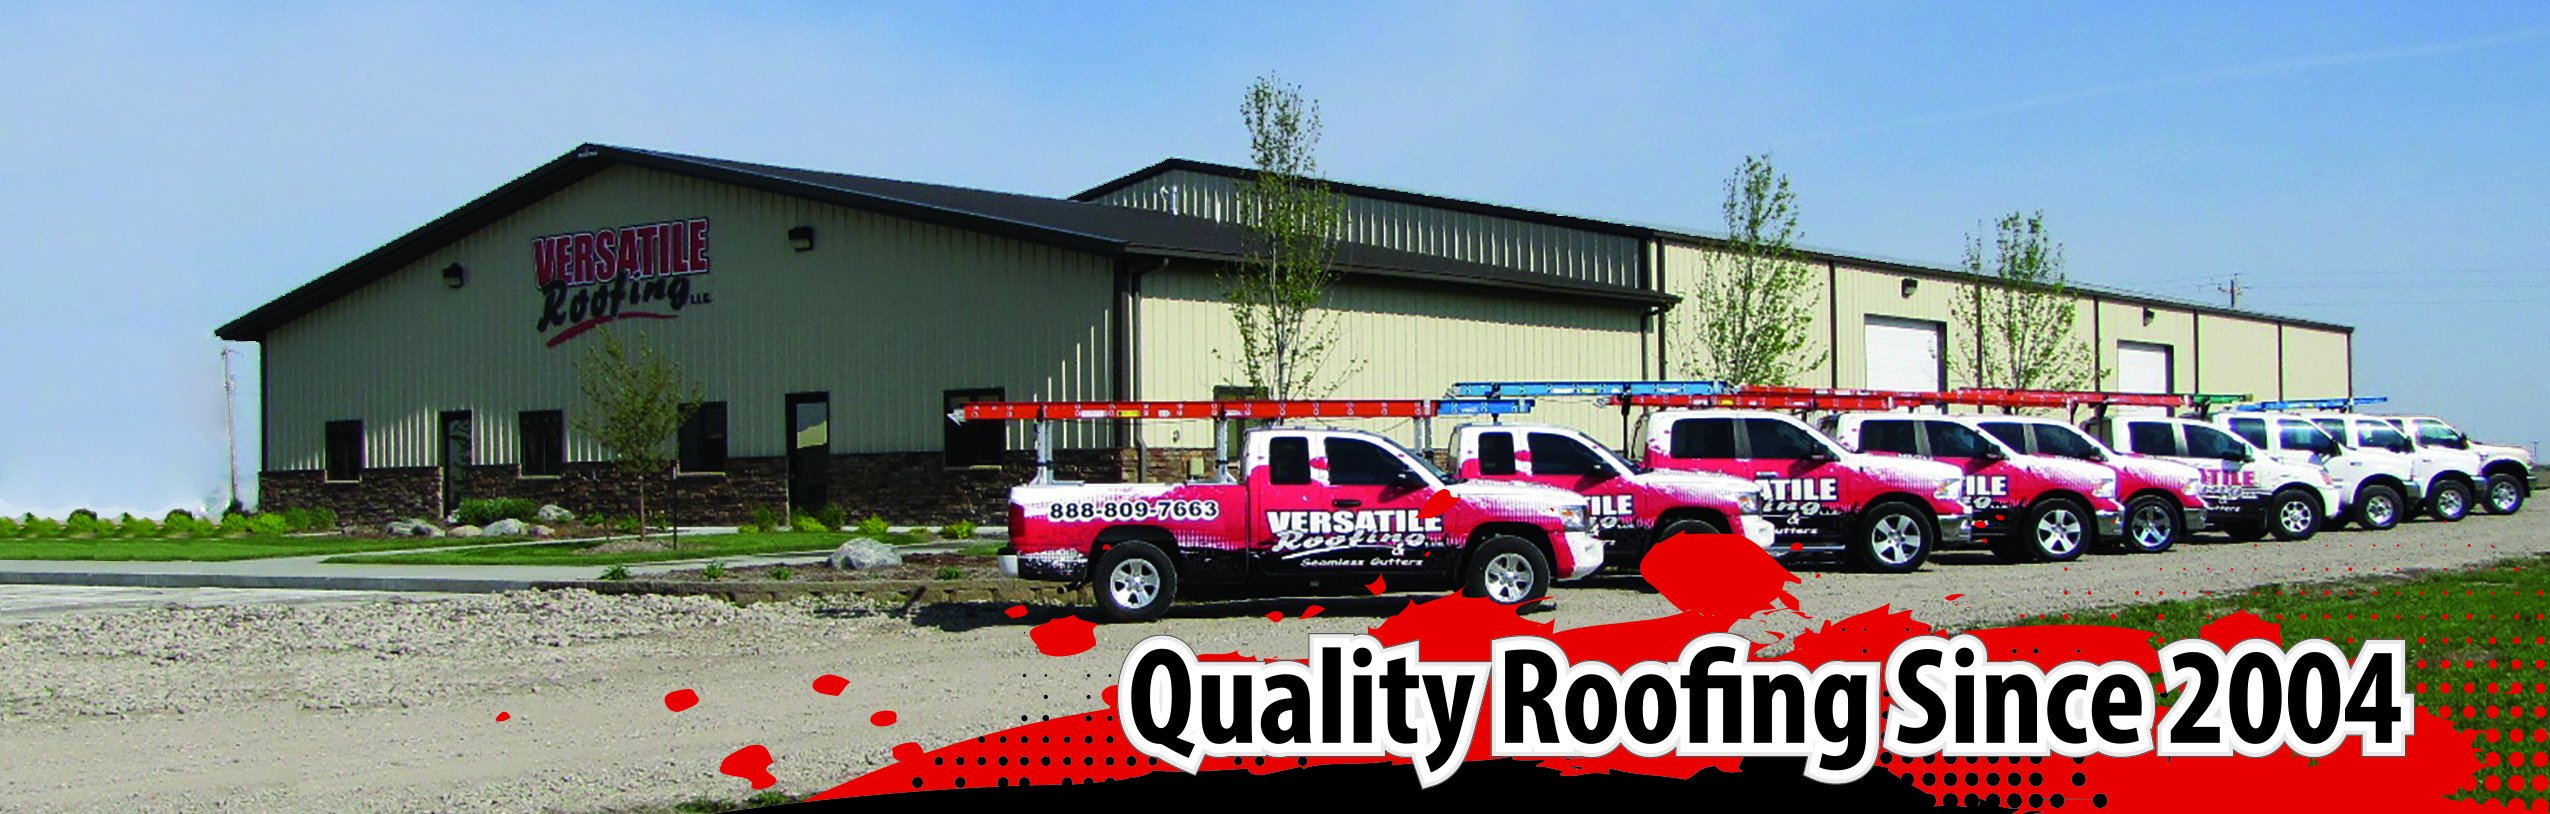 Roofing contractor location to purchase asphalt shingles in Kearney, NE